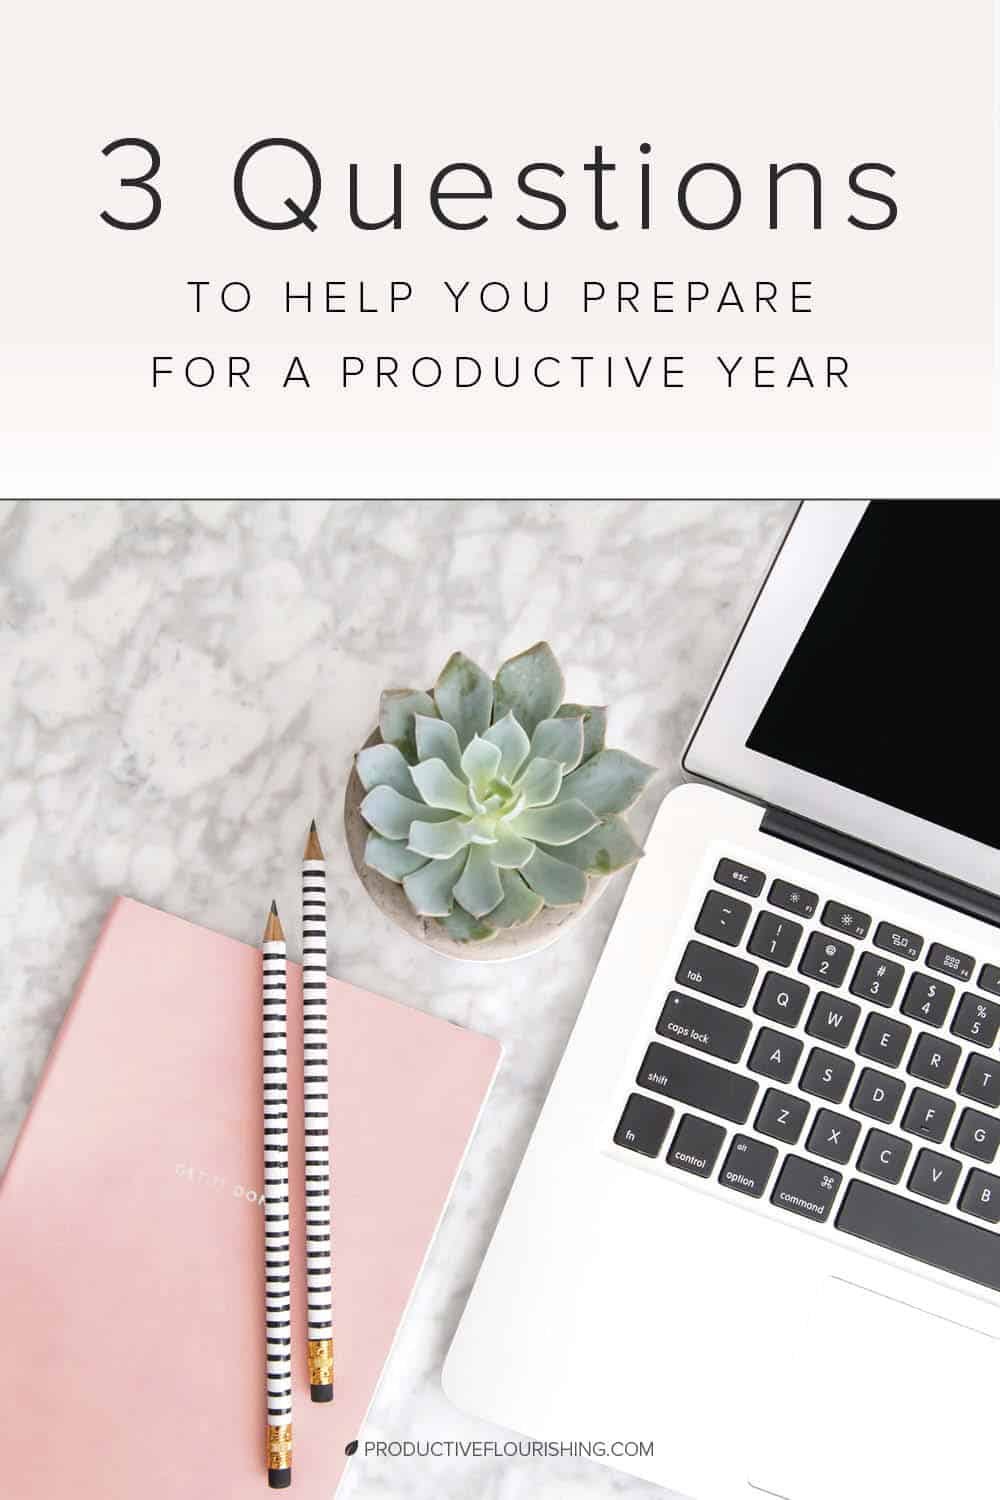 There’s a difference between knowing you can do something and knowing you will do something. Here are 3 questions you can ask yourself that will help prepare you for a productive year. #businessproductivity #goalsetting #productiveflourishing